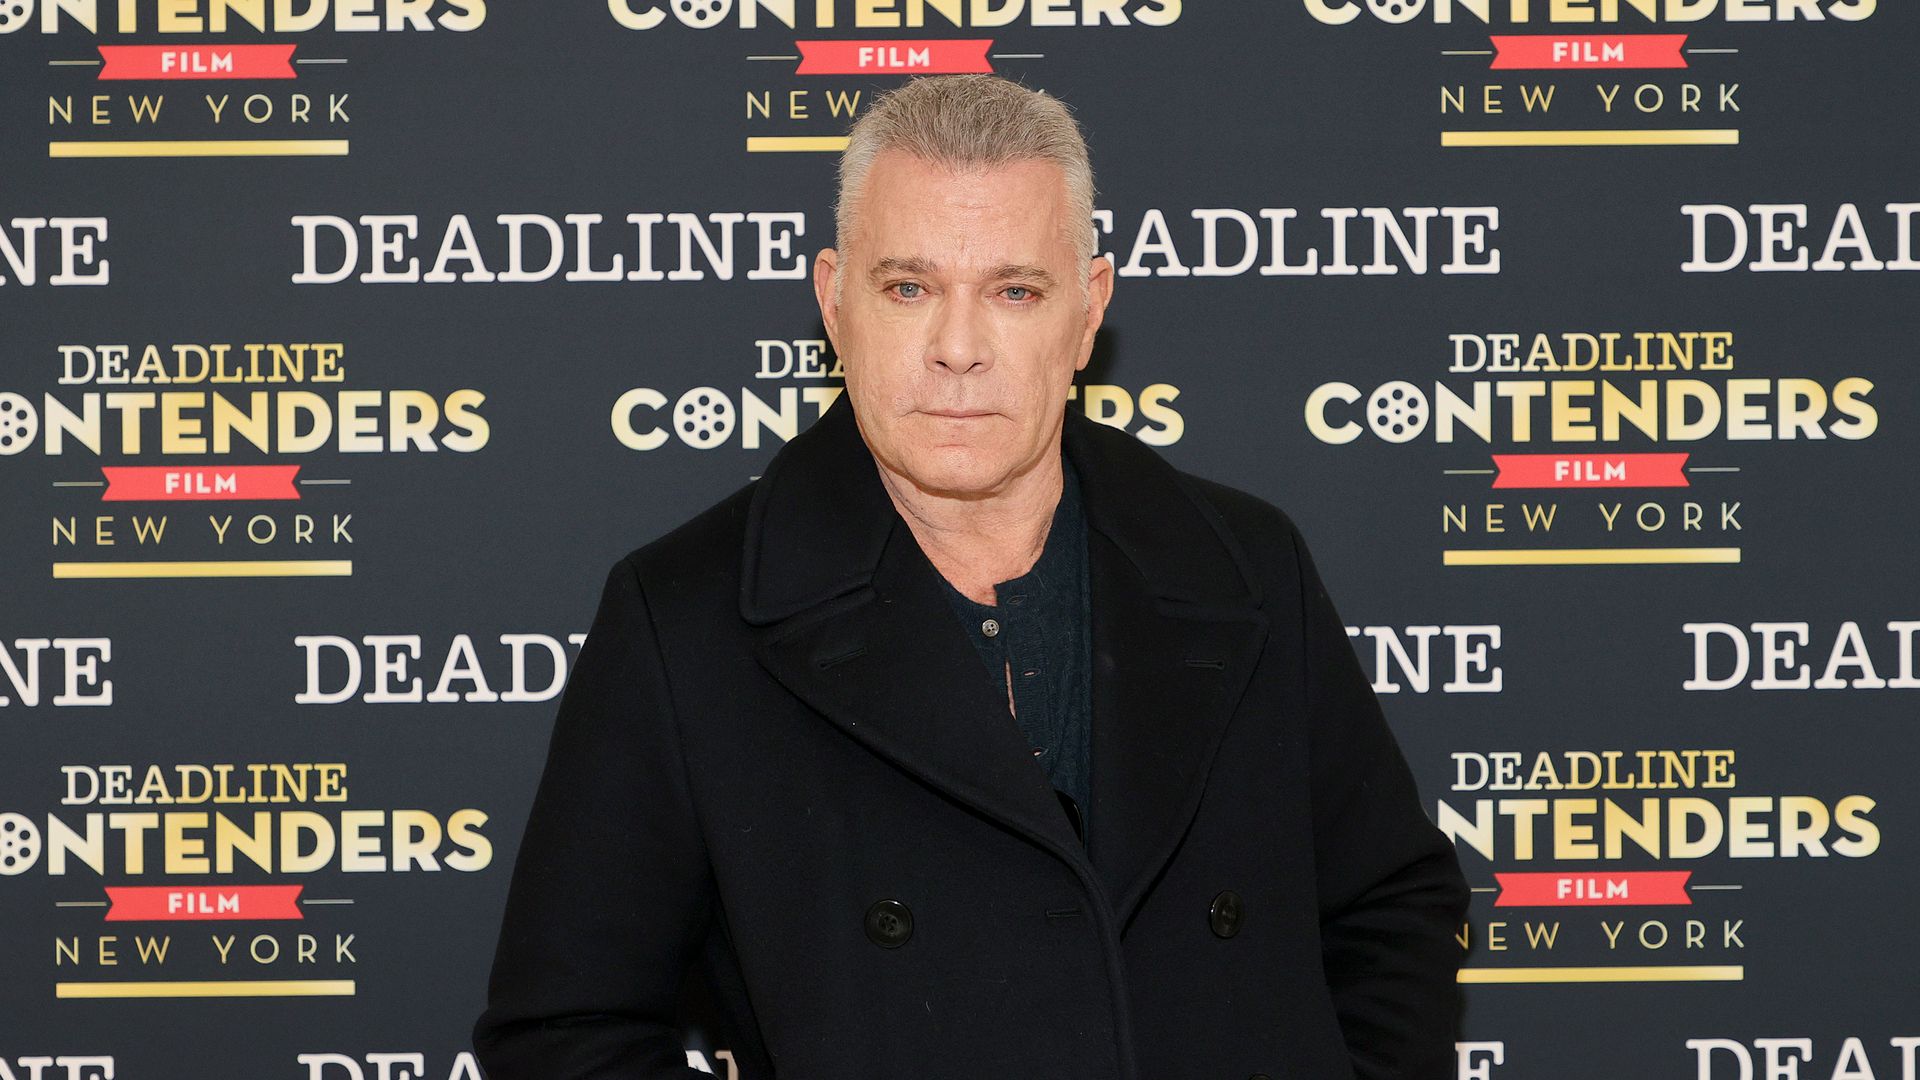 Ray Liotta from Warner Bros. Pictures' "The Many Saints of Newark" attends Deadline Contenders Film: New York on December 04, 2021 in New York City